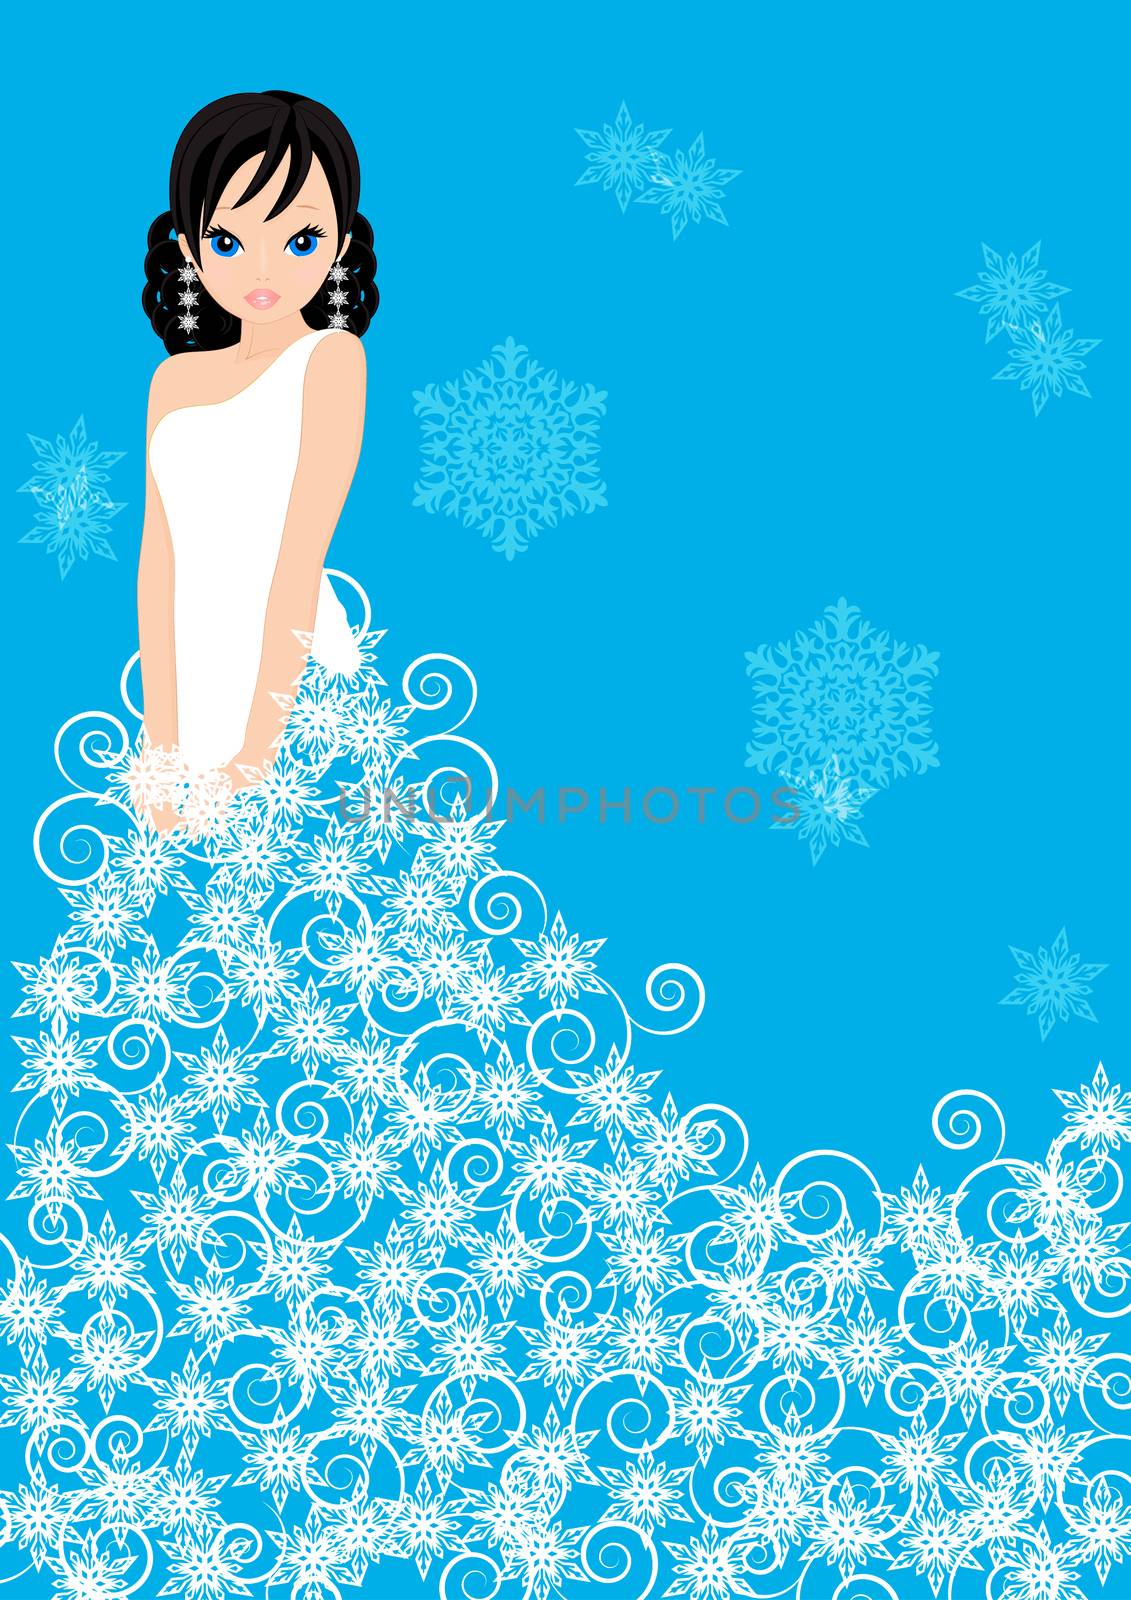 girl snow Queen in a dress made of snowflakes on blue background